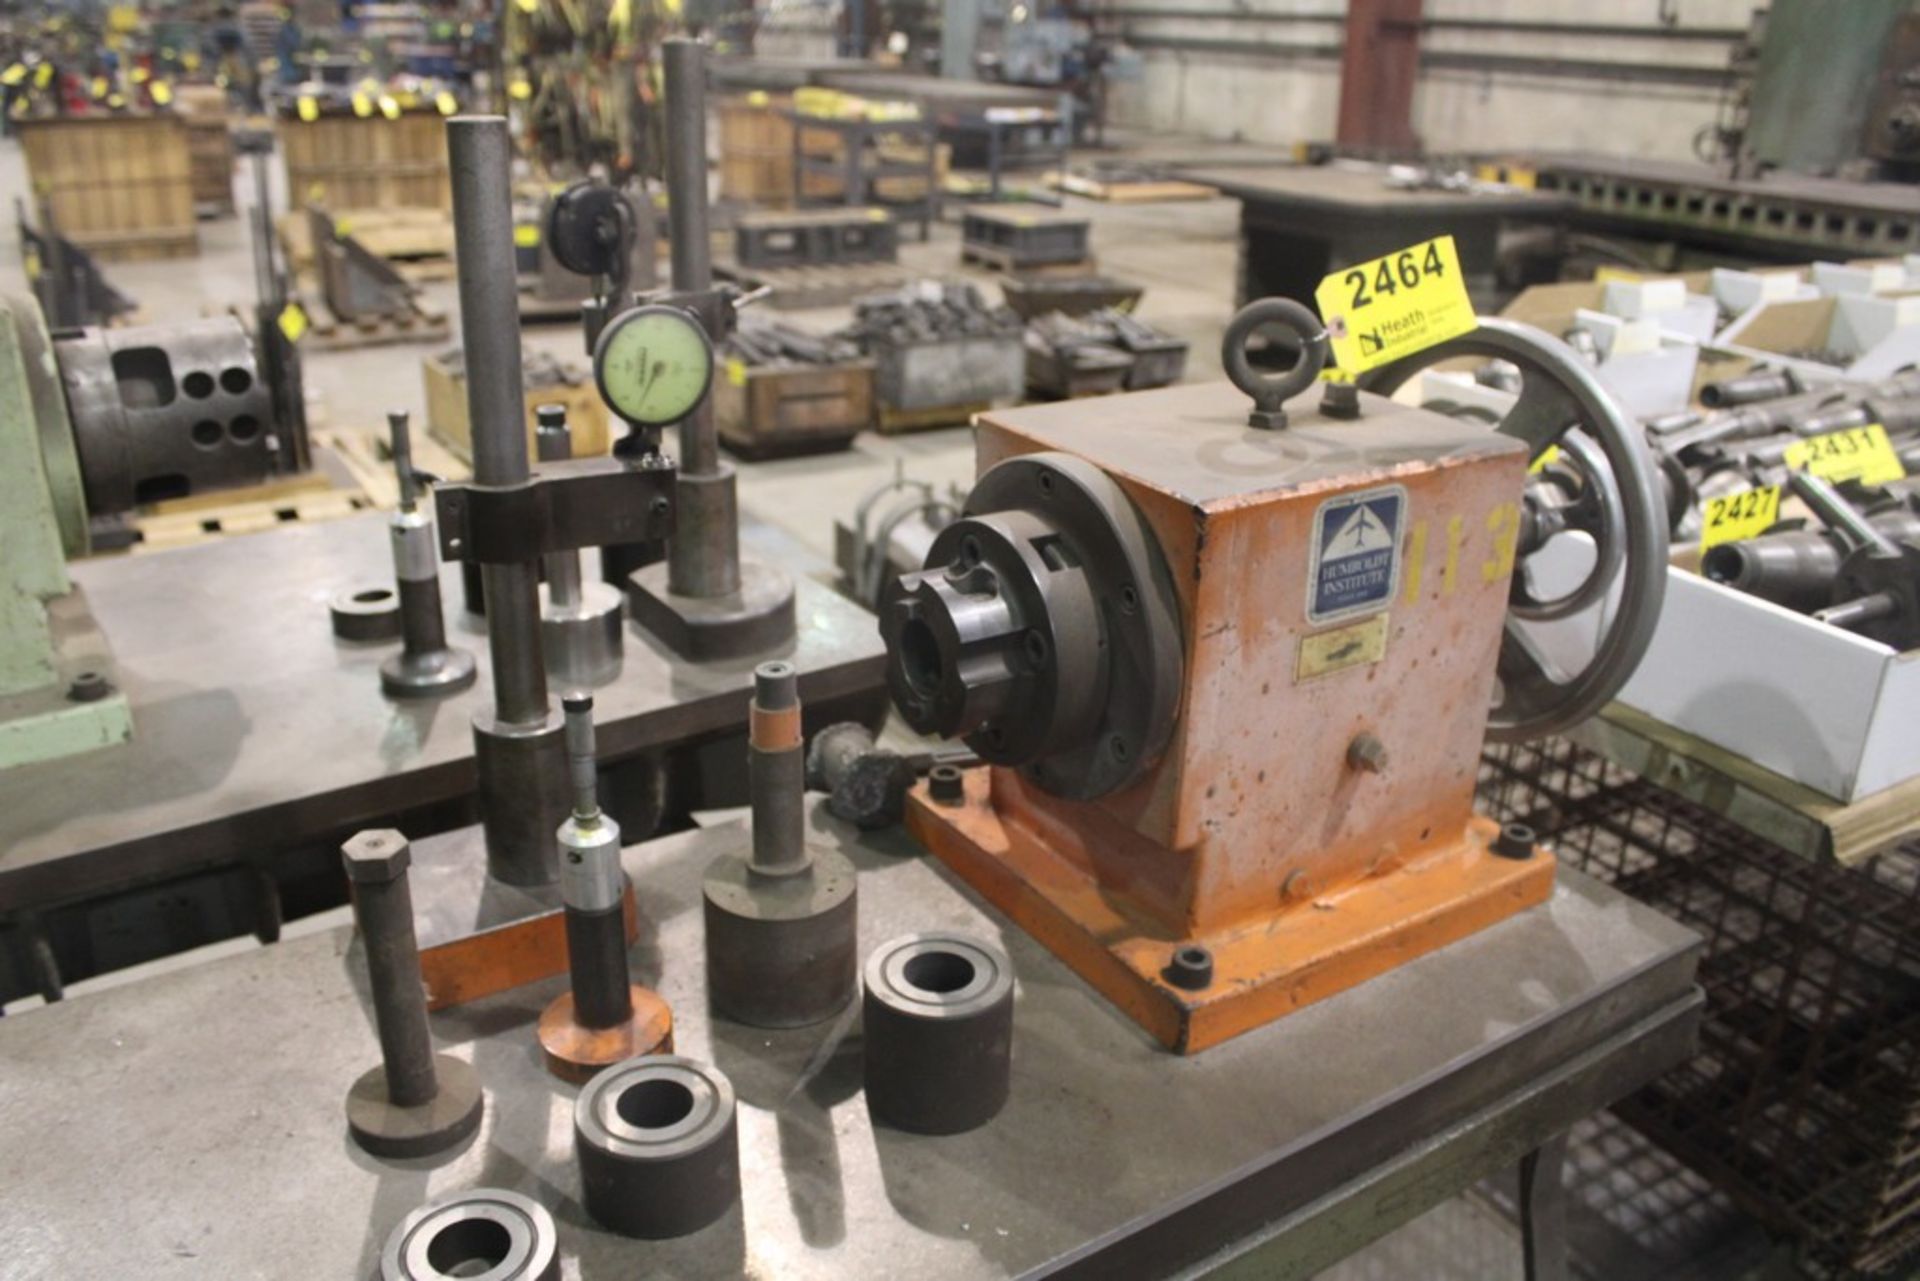 40 TAPER BORING BAR TOOL SETTER WITH INDIECATOR & ACCESSORIES, TABLE - Image 2 of 2